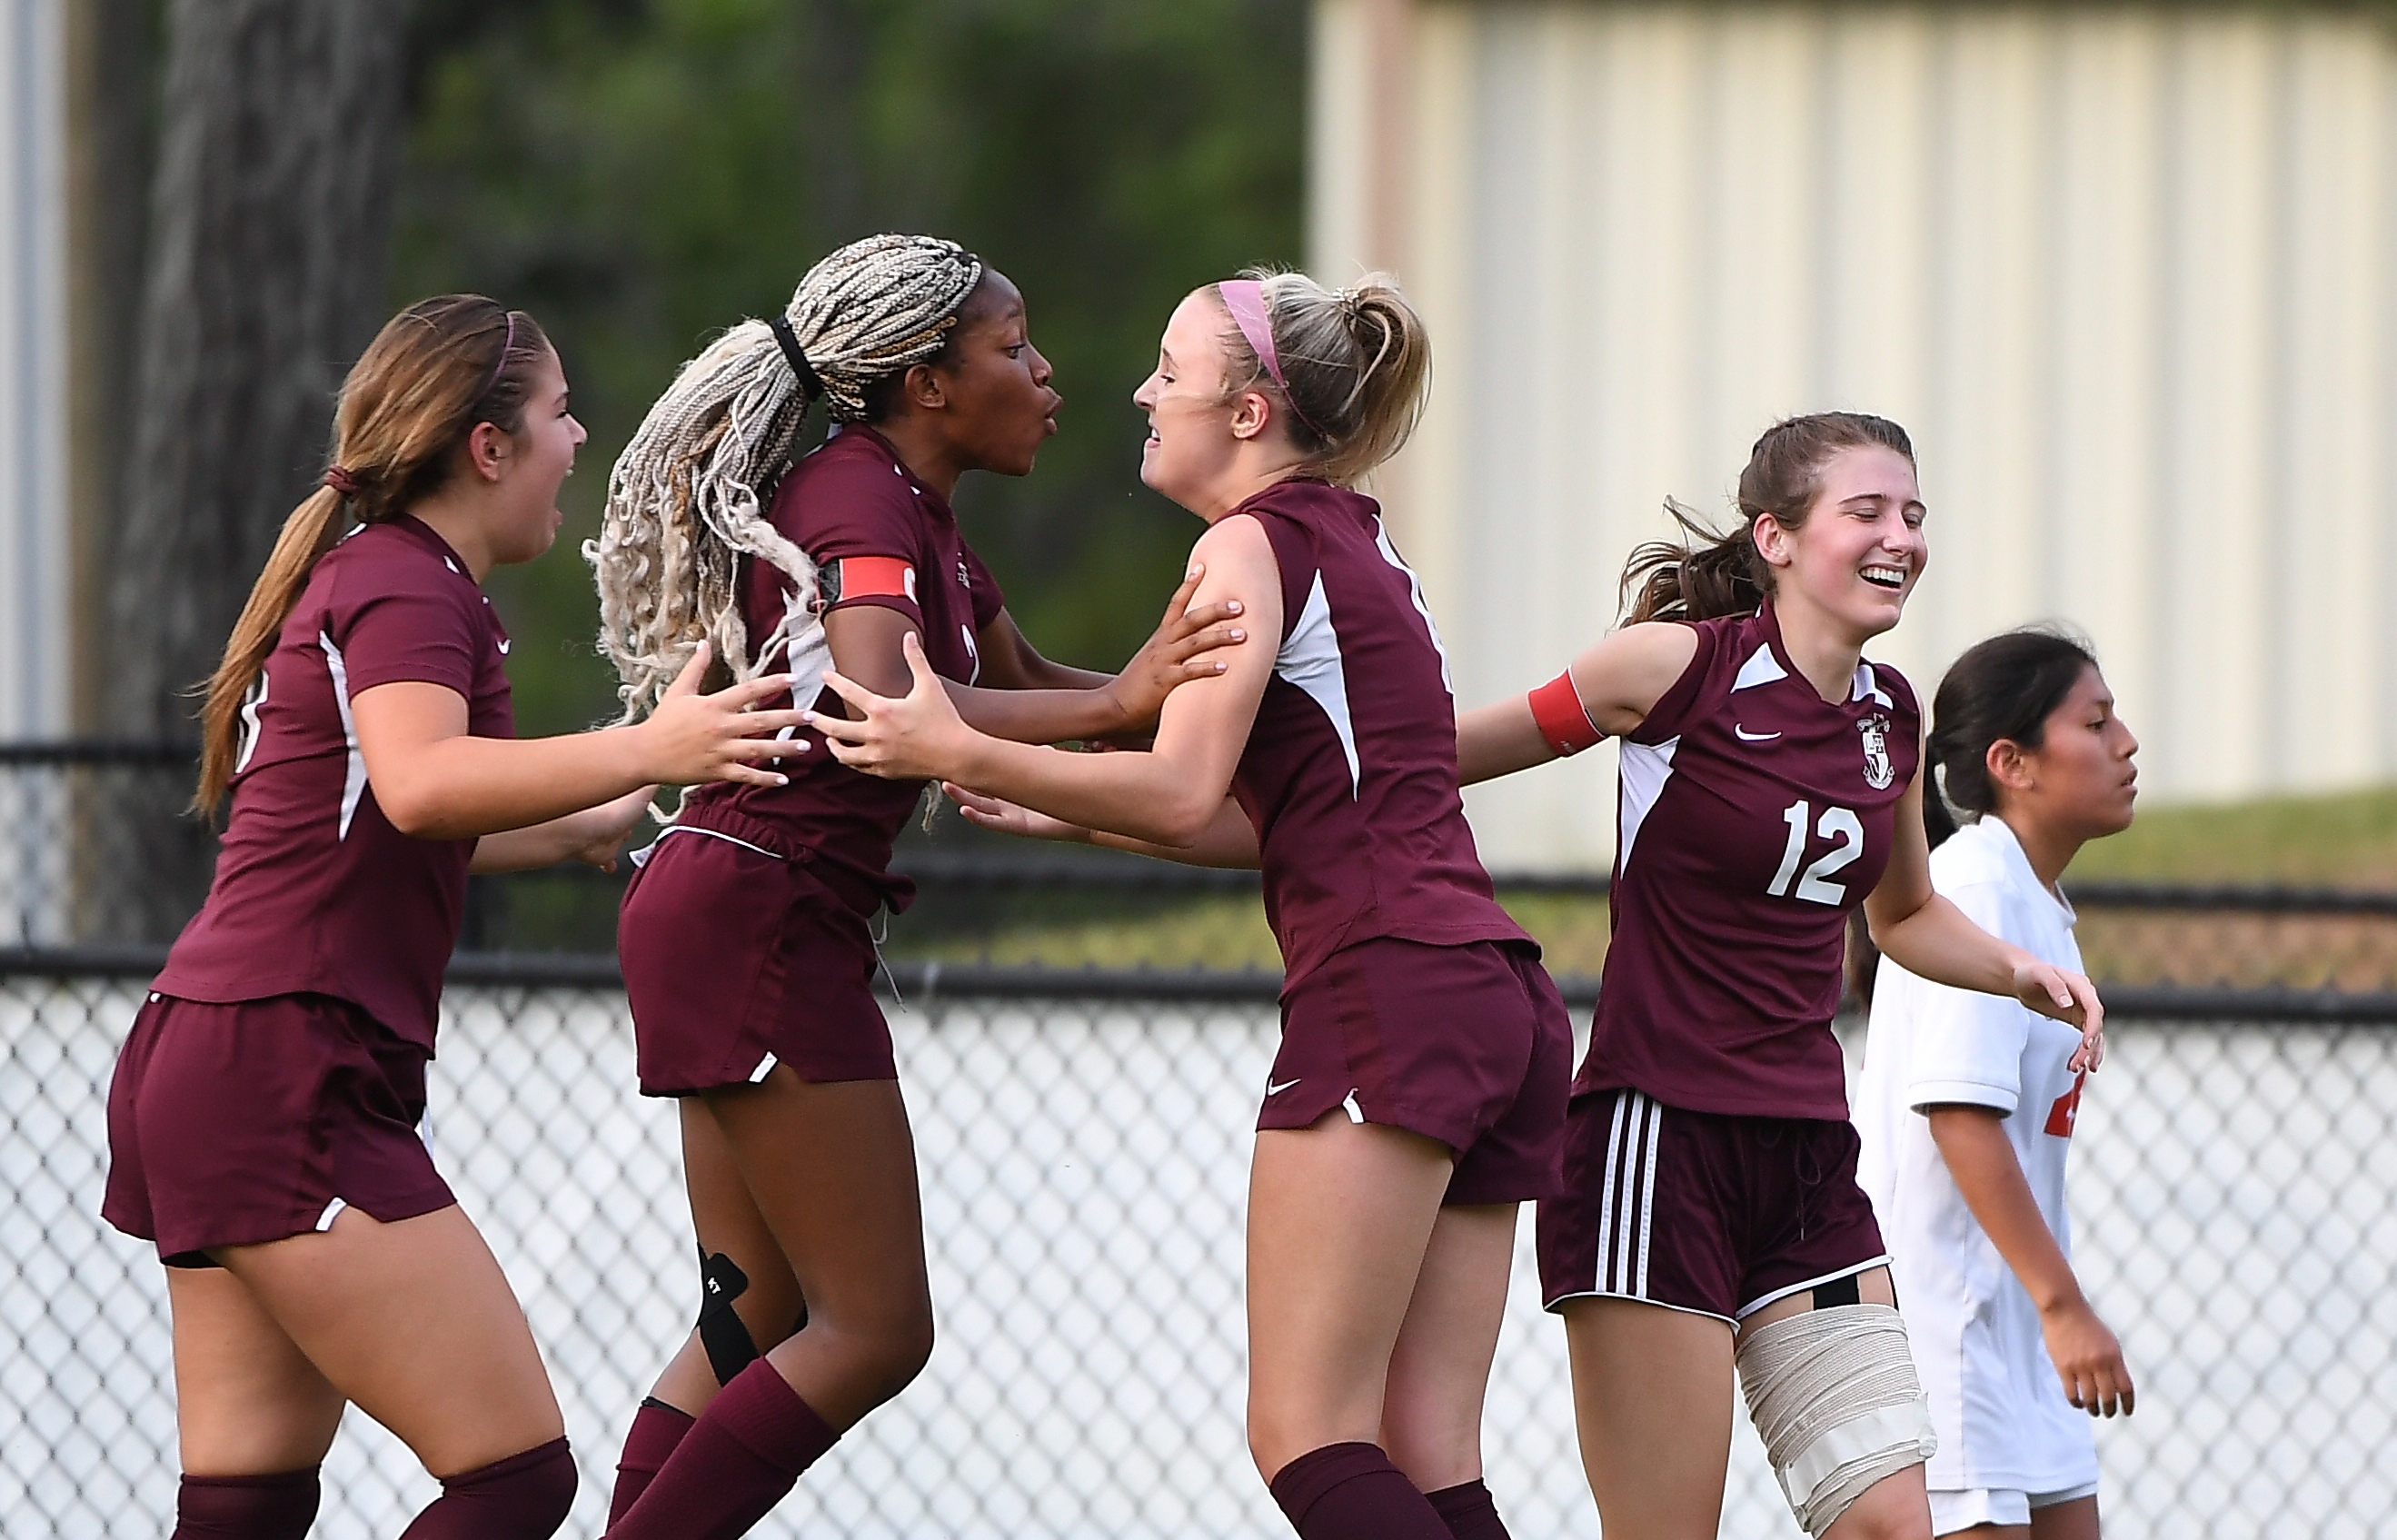 Donoho’s Tosin Sanusi embraces teammate Erin Turley after Turley gave the Lady Falcons the lead in their match with a goal 12 seconds before halftime. (Photo by B.J. Franklin)